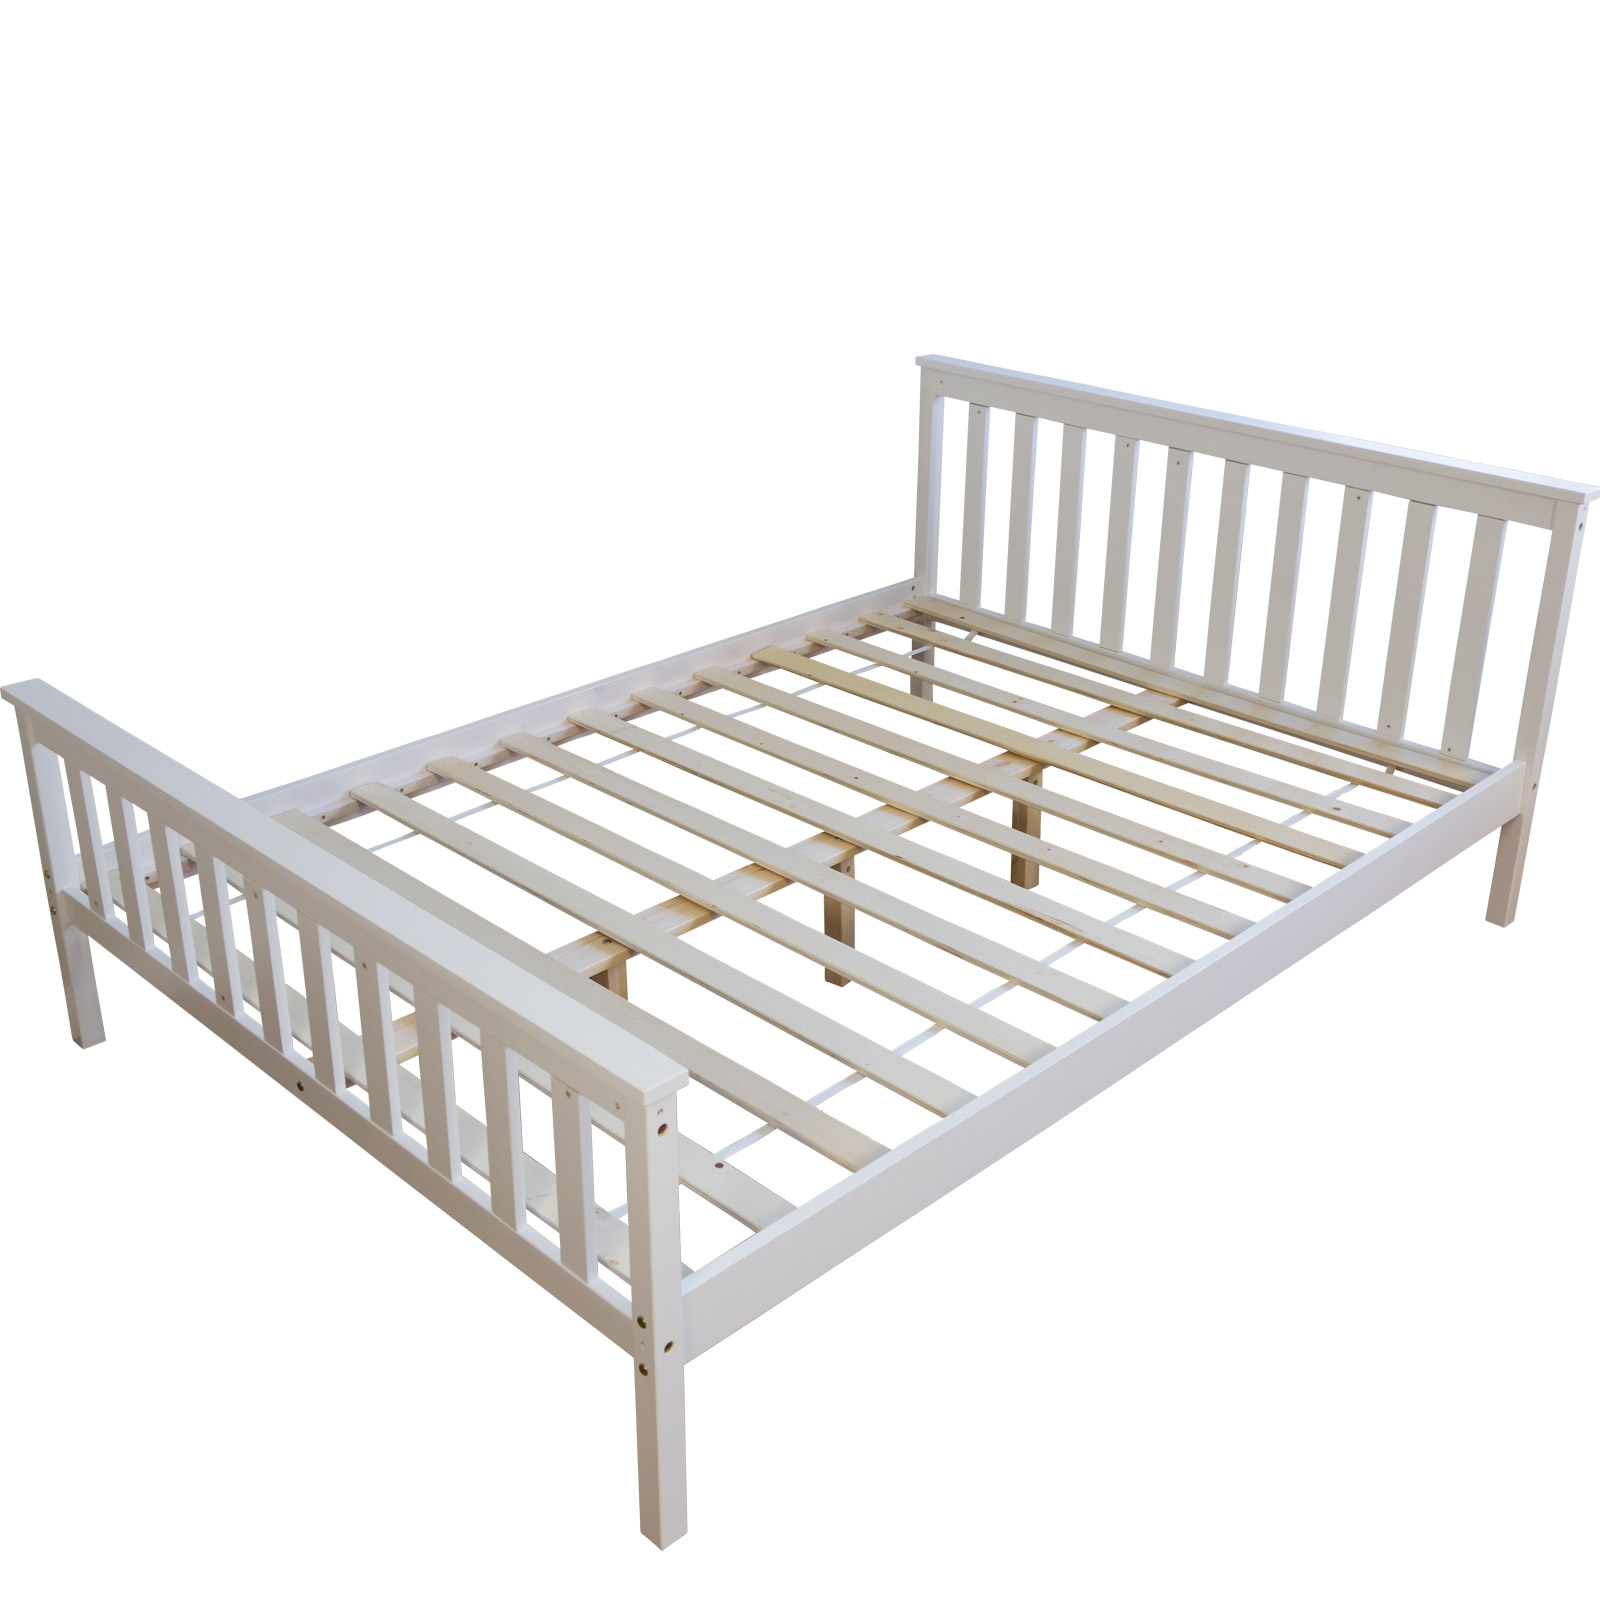 4FT small double bed Shaker Style Daybed white